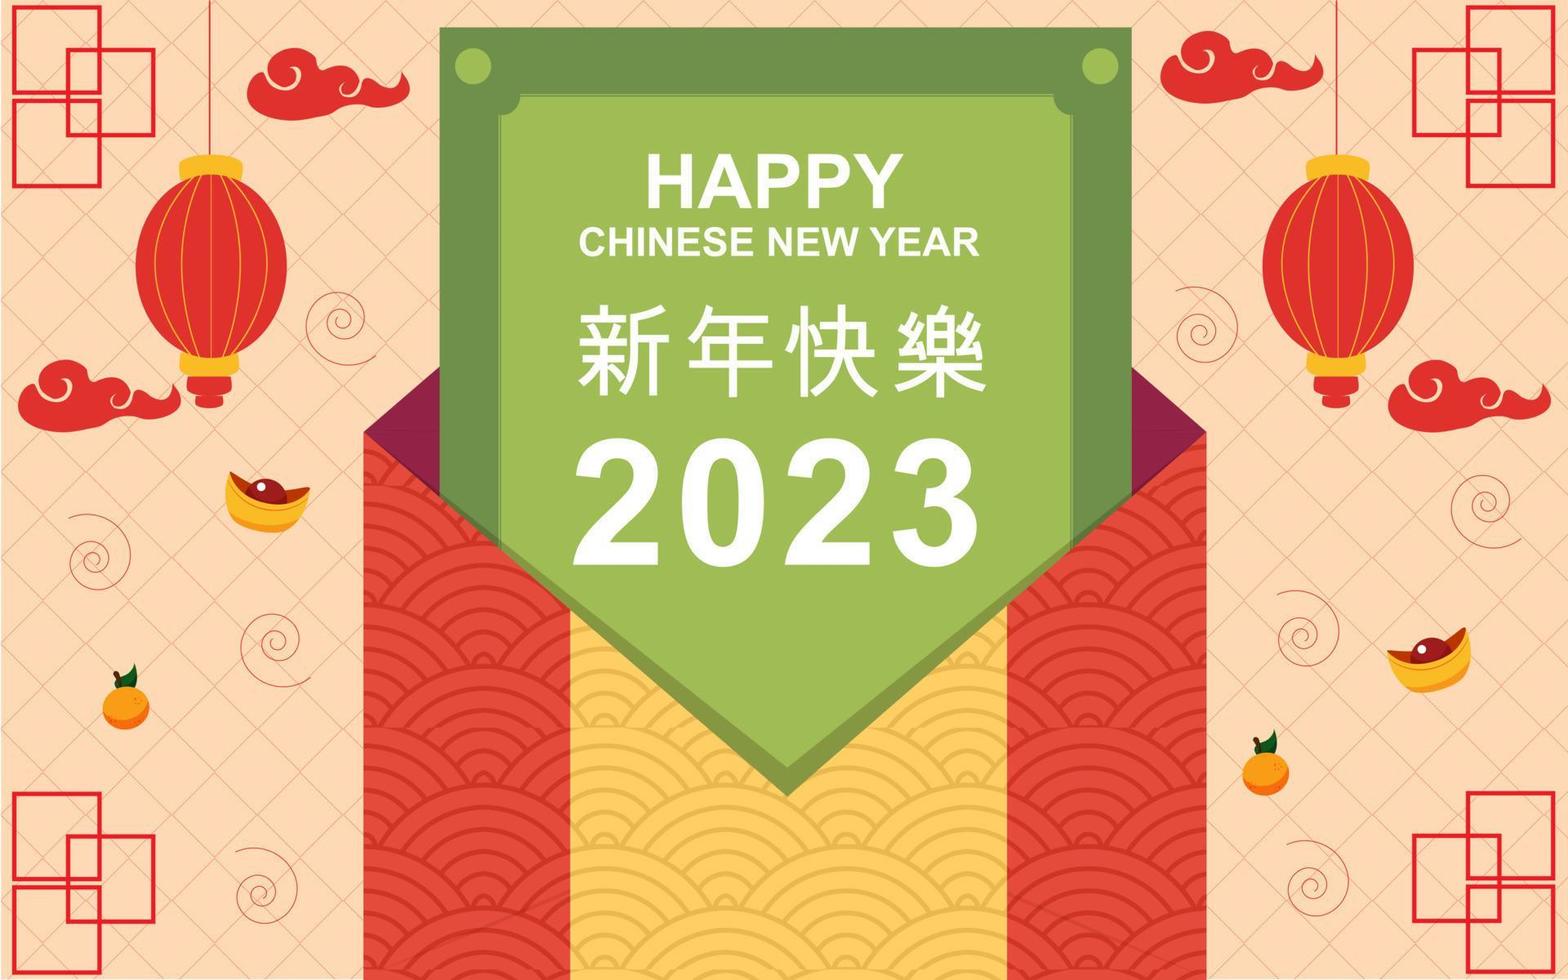 chinese-new-year-2023-year-vector-illustration-happy-chinese-new-year